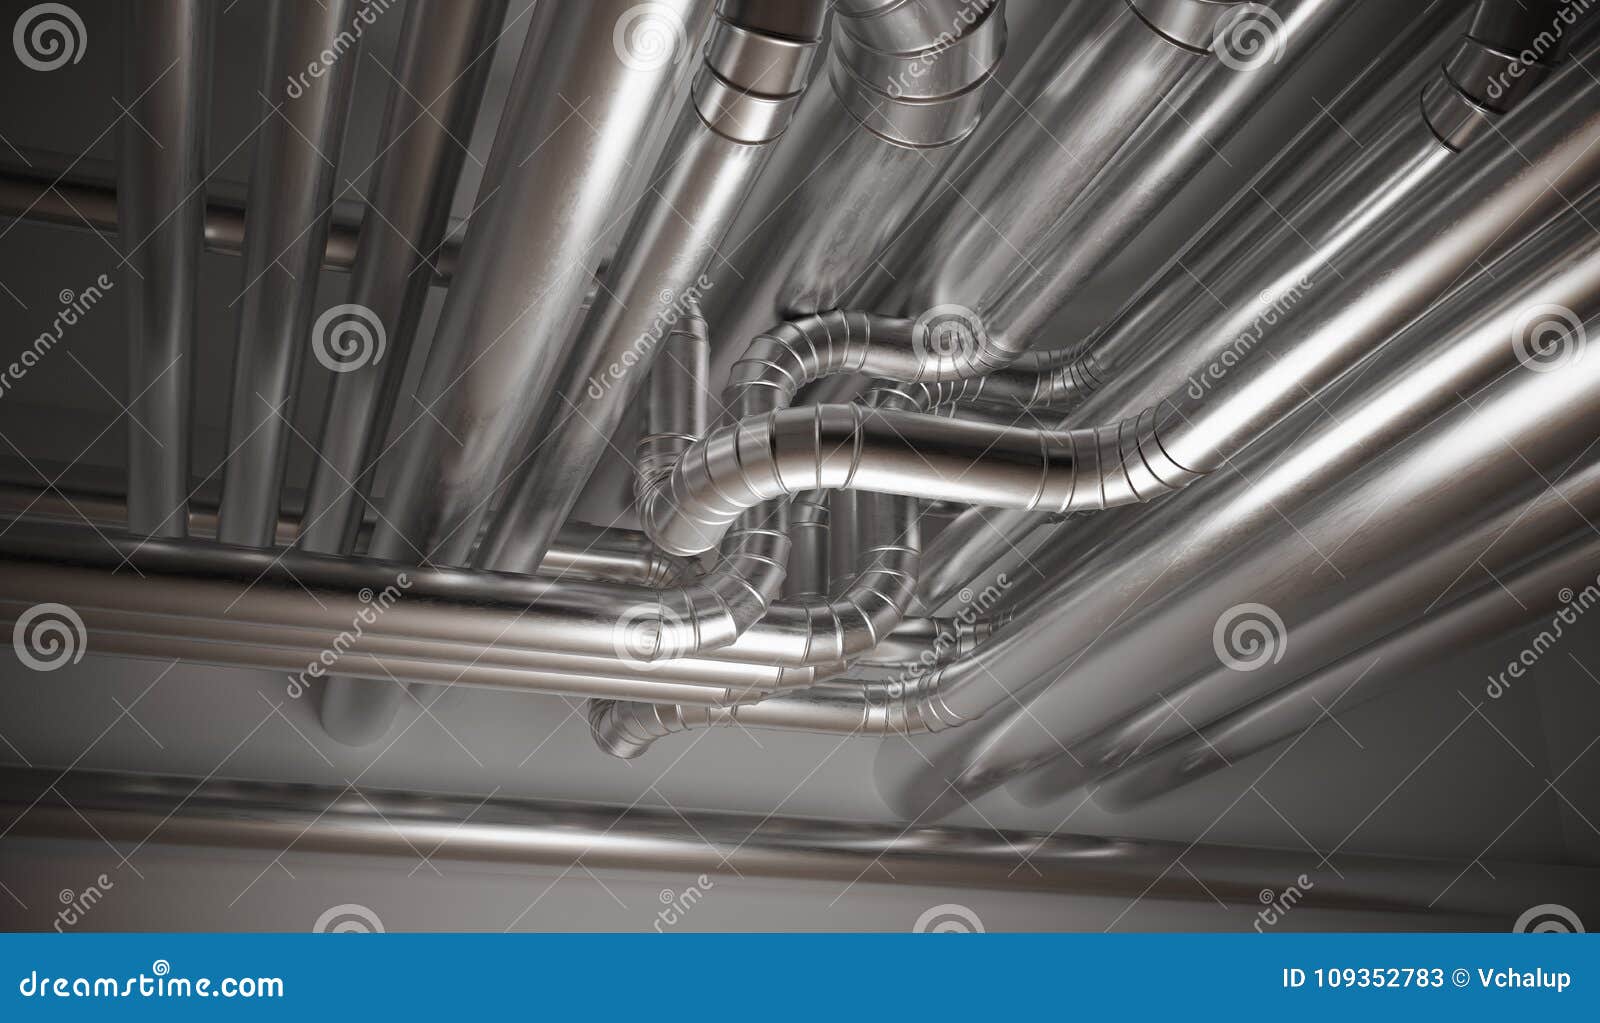 hvac heating, ventilation and air conditioning pipes. 3d rendered 